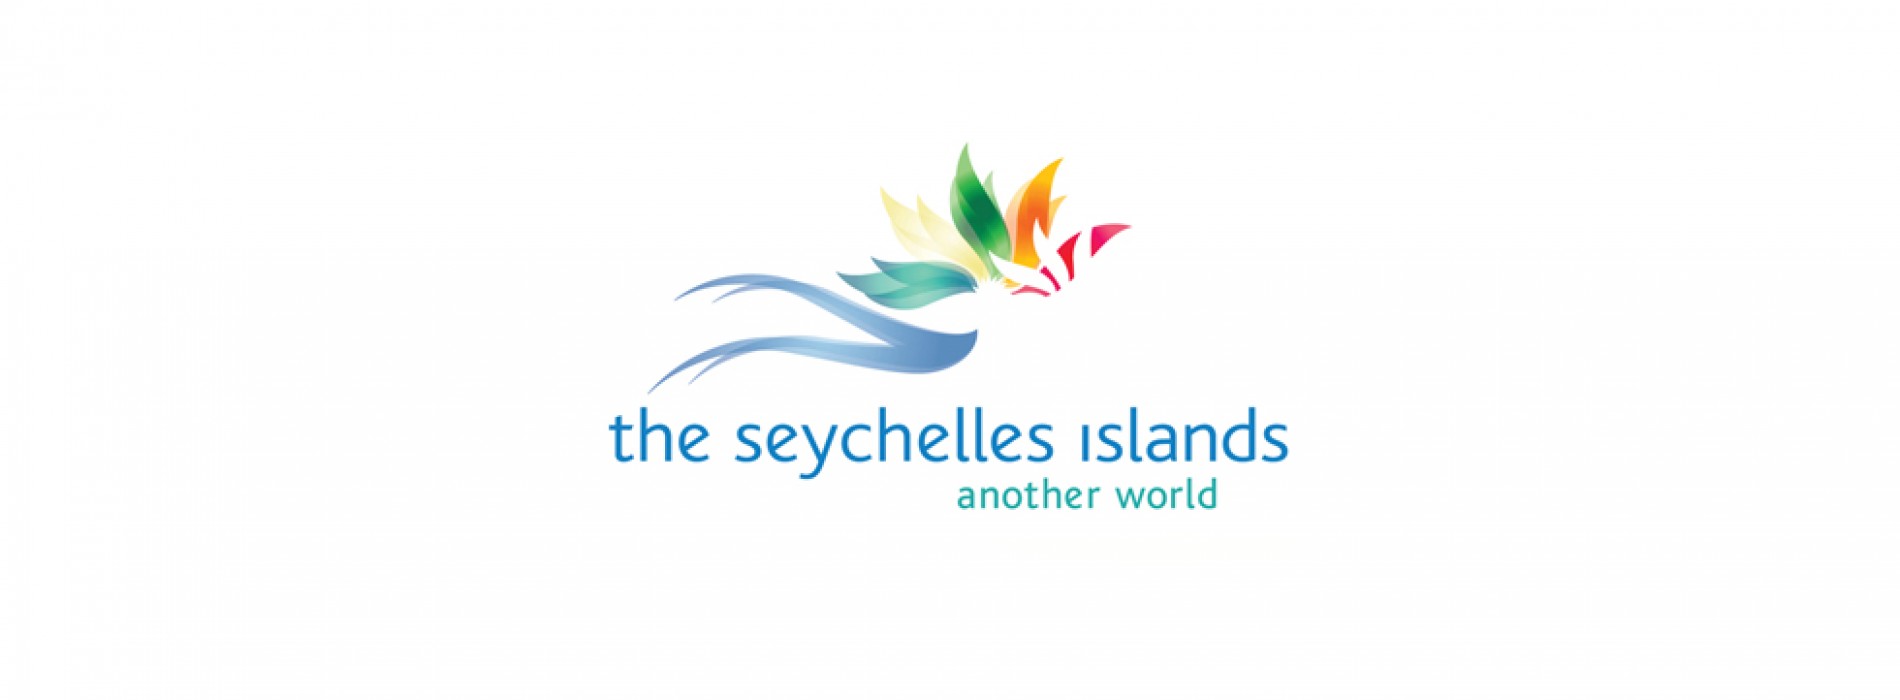 Seychelles records 62% increase in tourist arrivals from India